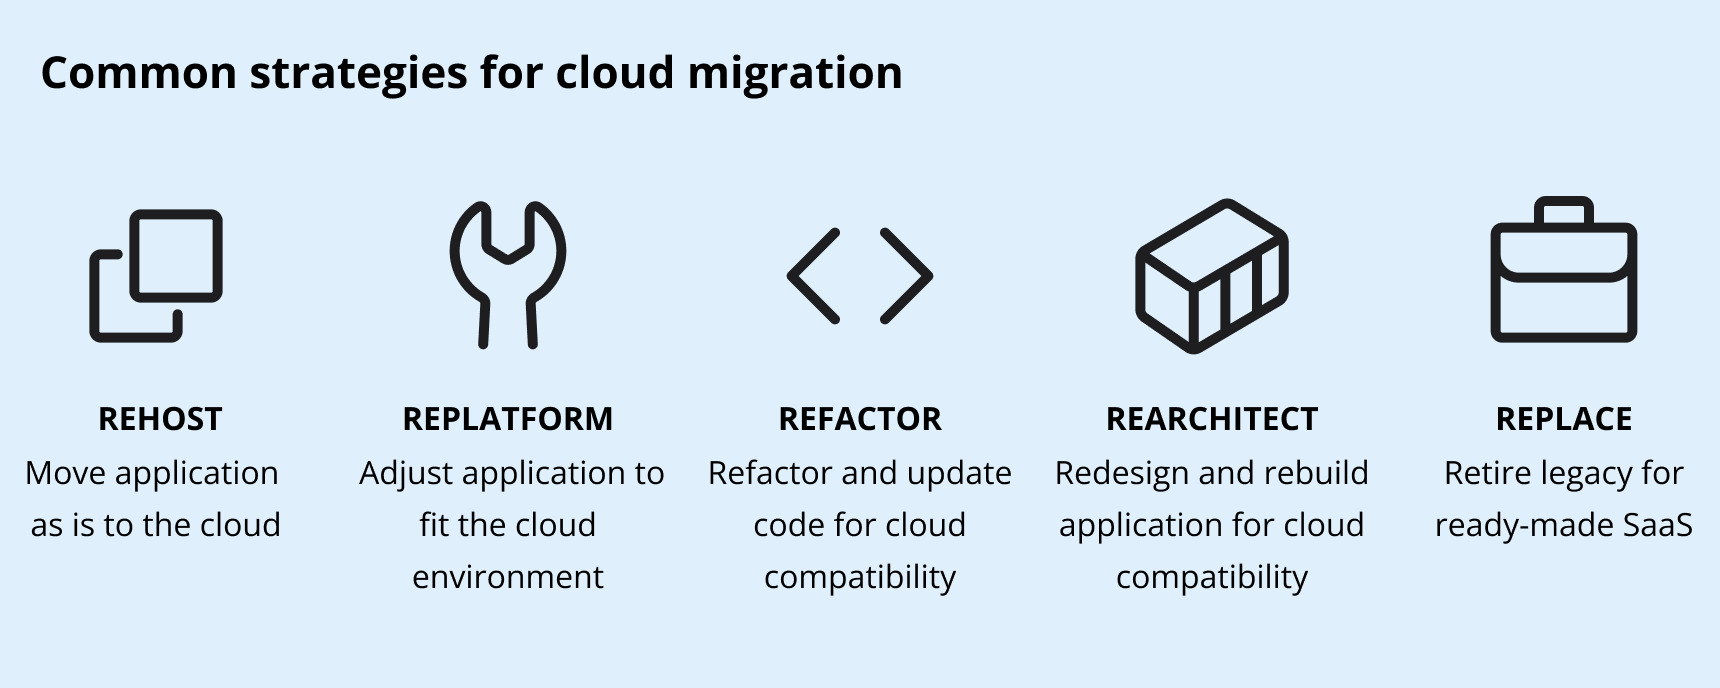 Strategies for cloud migration